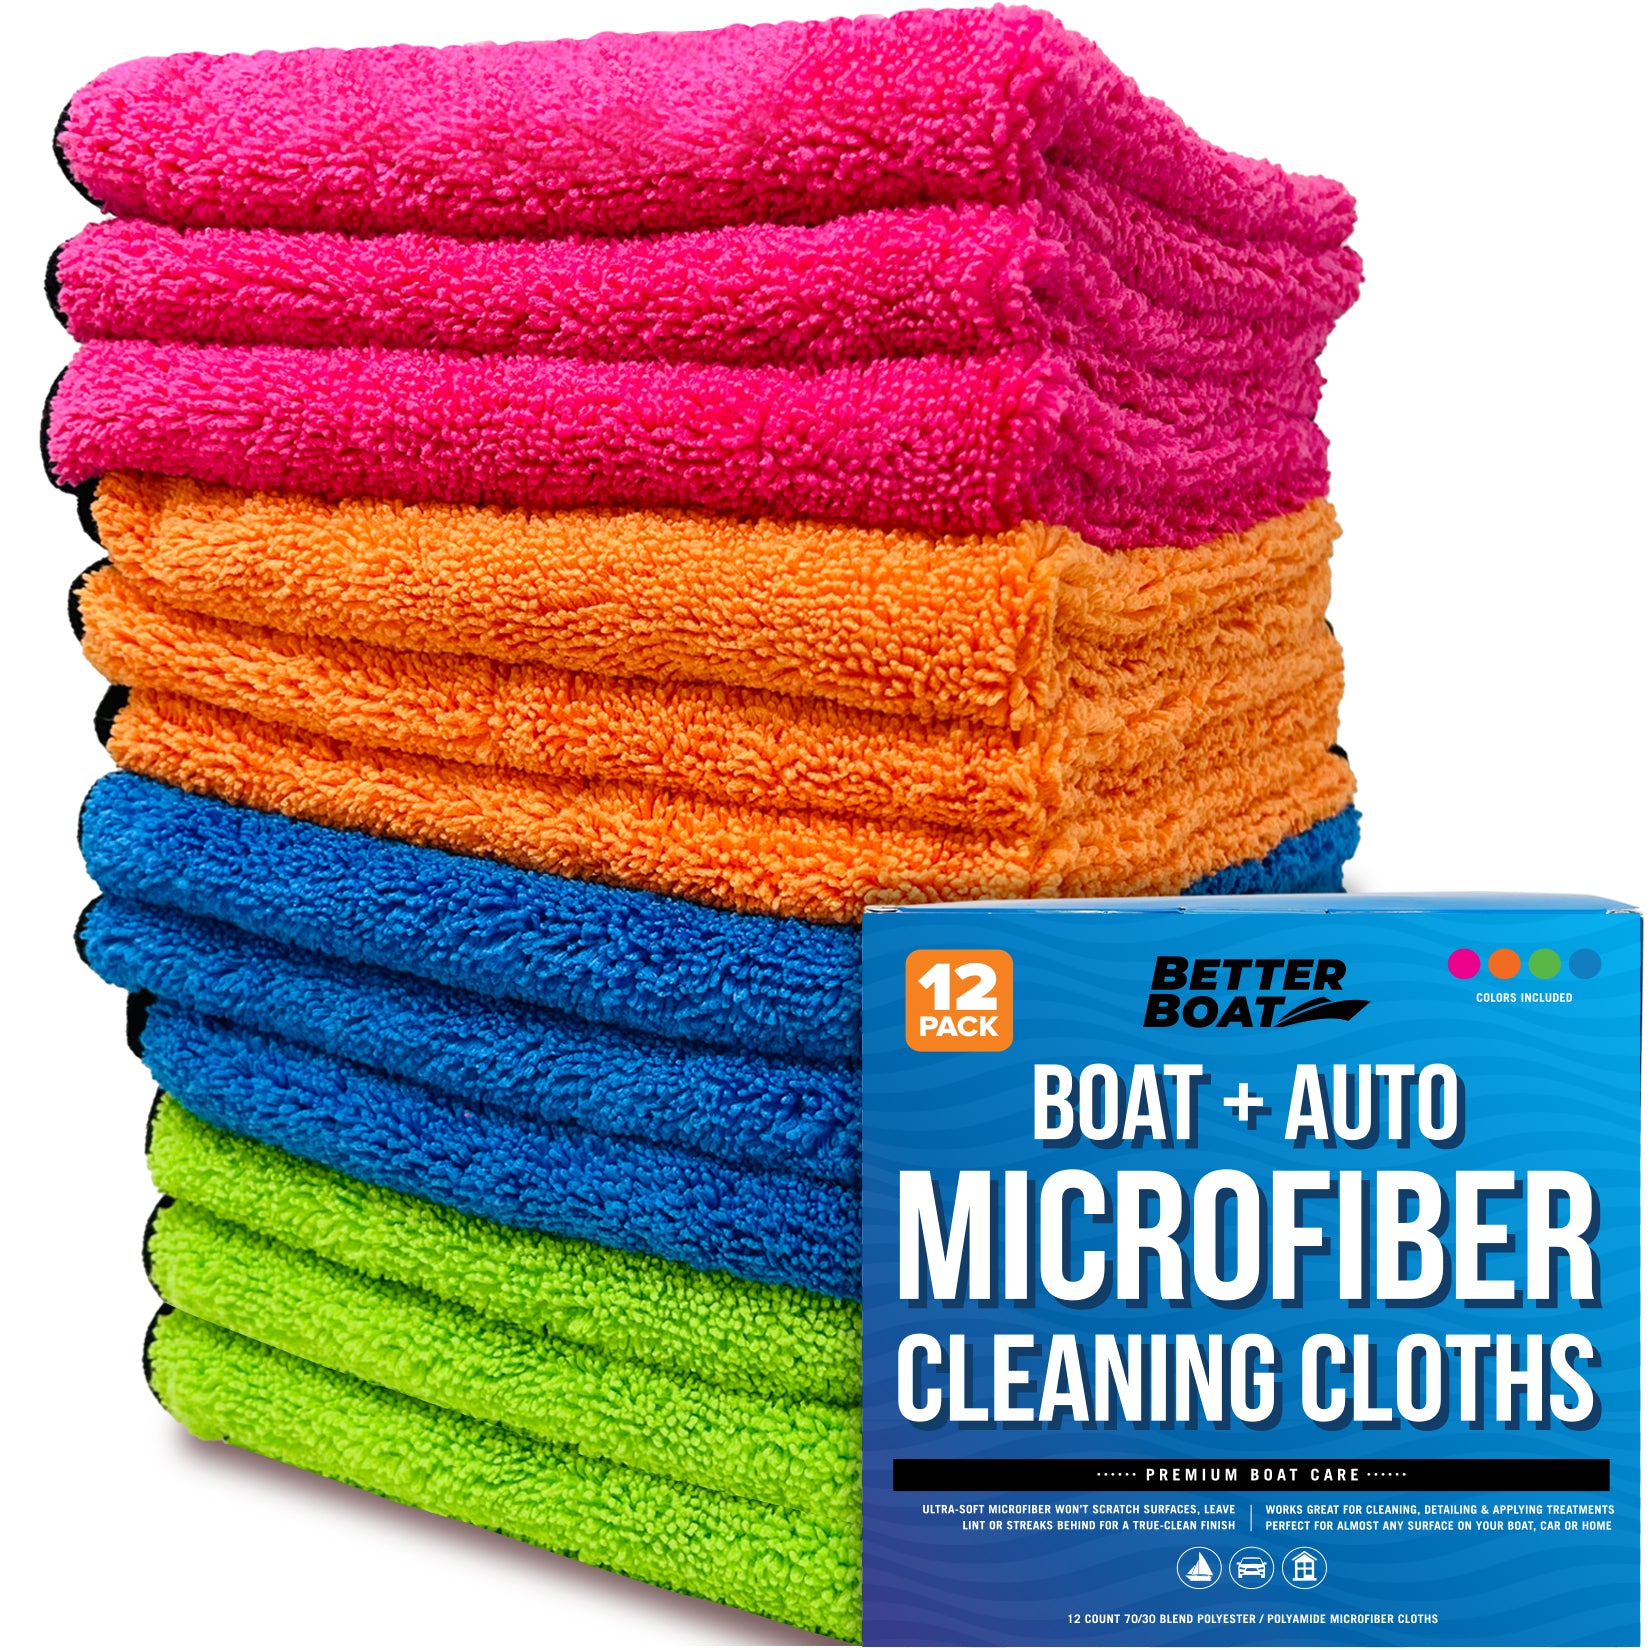 Microfiber Cleaning Cloth Rags (12 Pack)